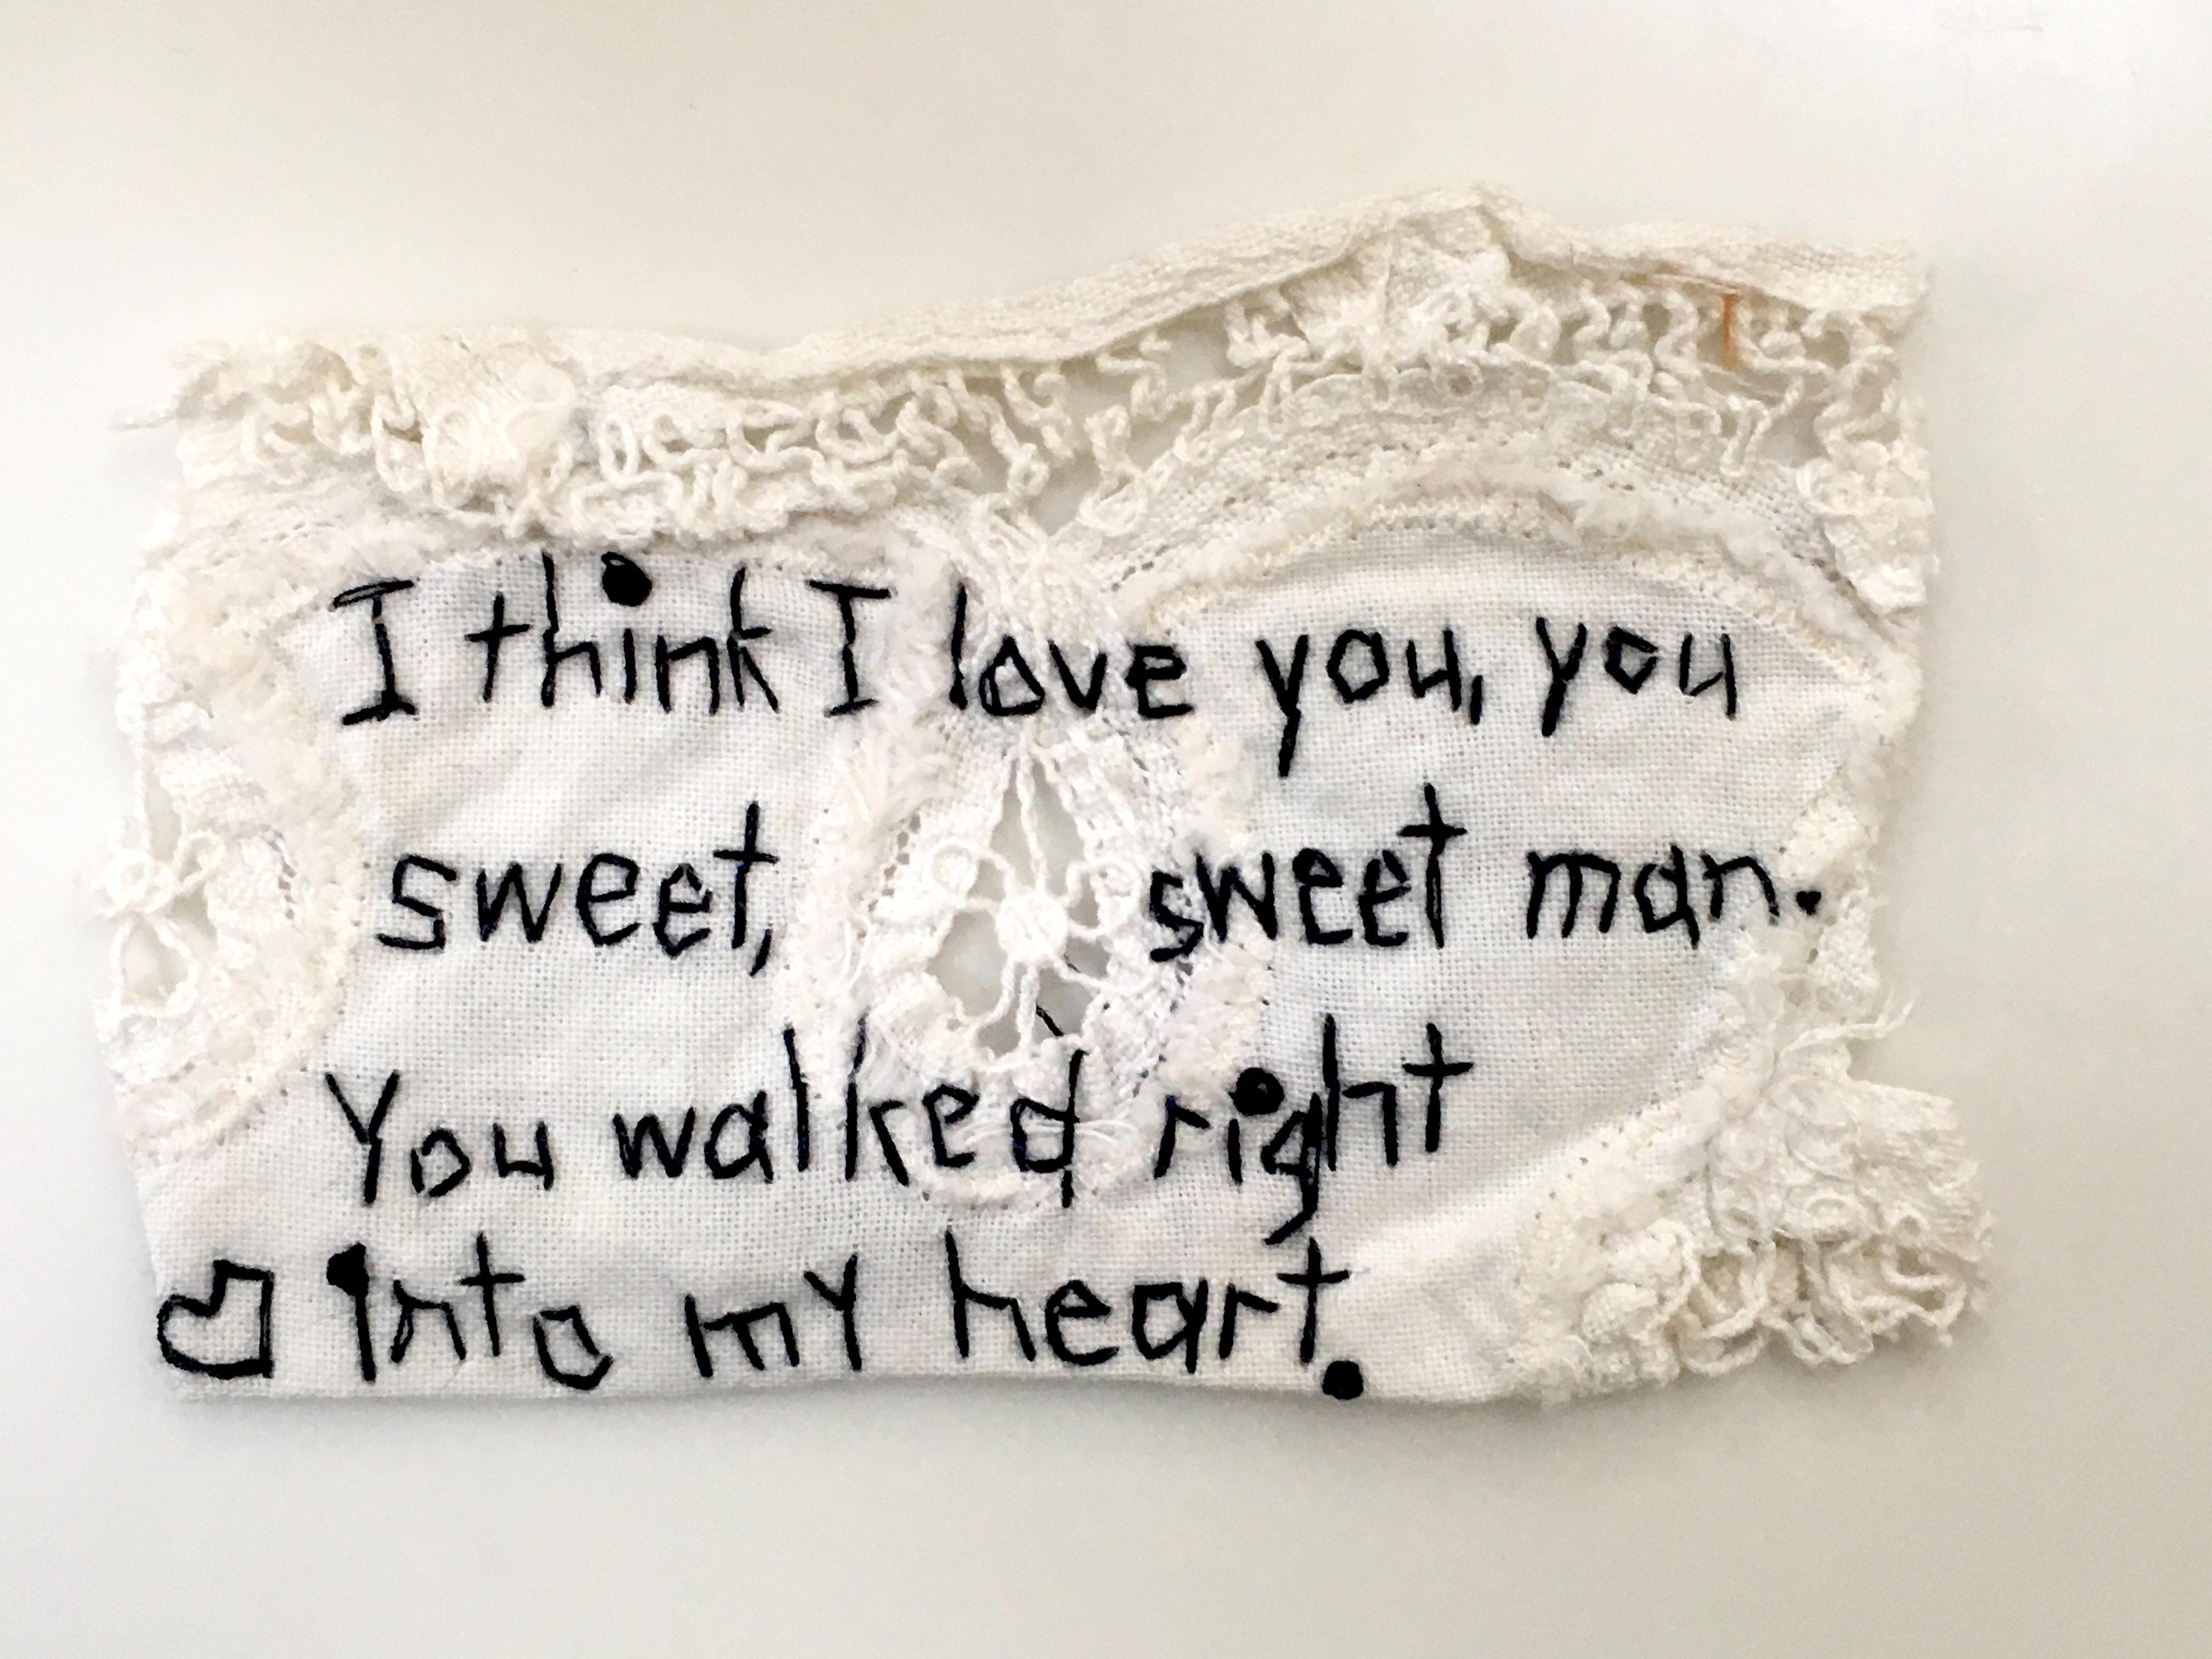 Sweet Man - love narrative embroidery black thread on white vintage fabric - Mixed Media Art by Iviva Olenick